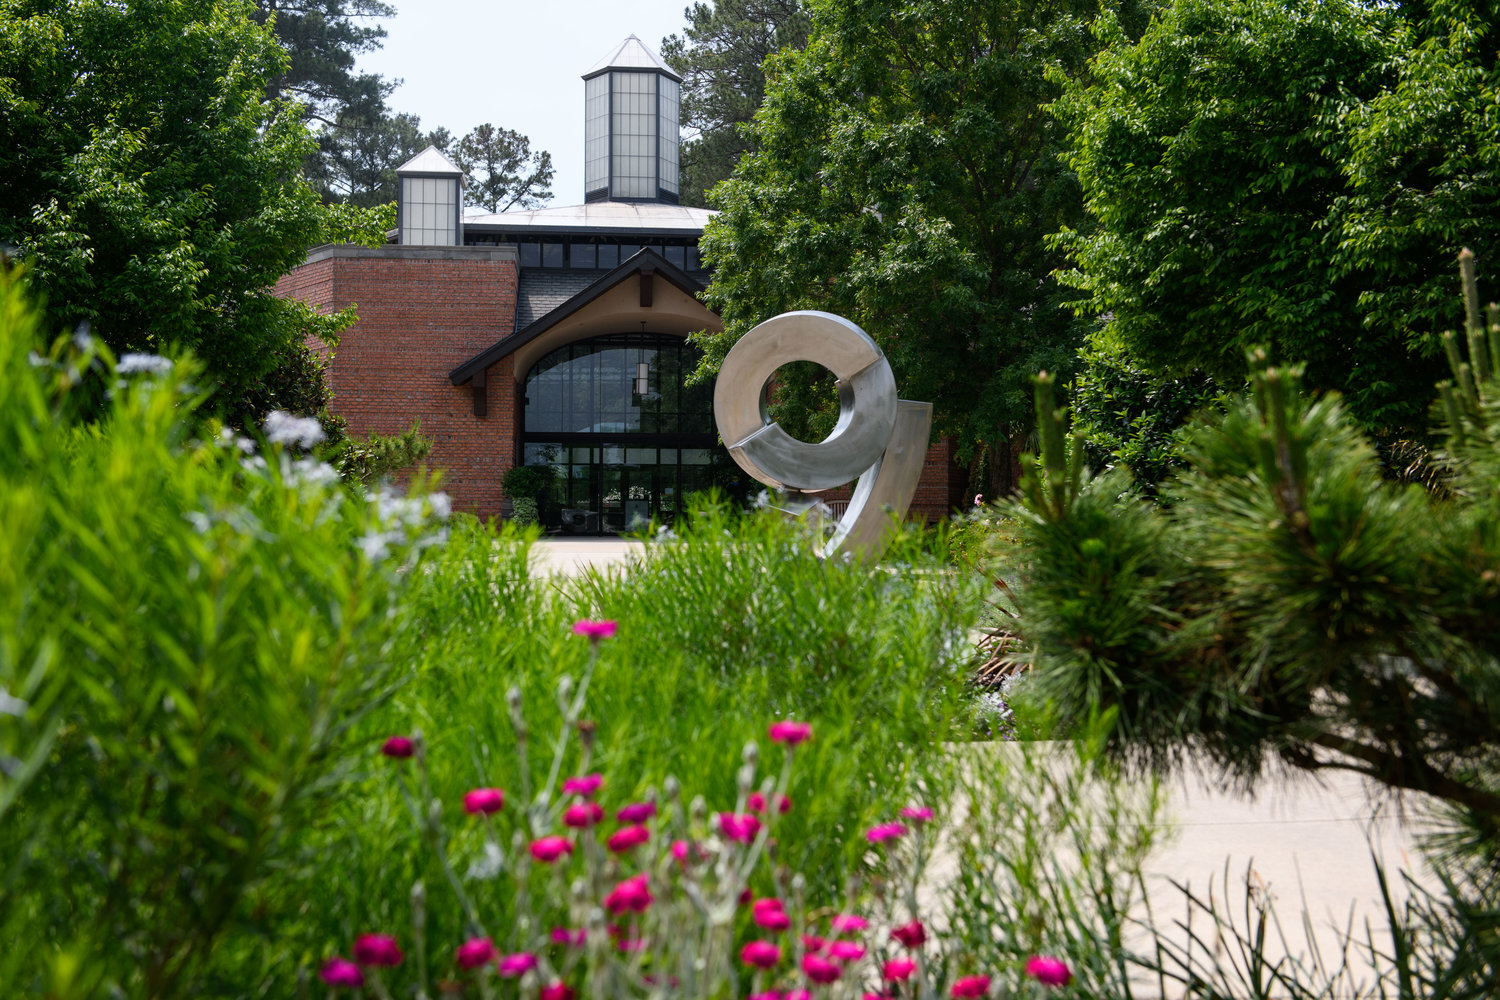 Cape Fear Botanical Garden is one of several nonprofit organizations that applied for American Rescue Plan Act funding from Cumberland County to support programs that will help the community recover from the pandemic.